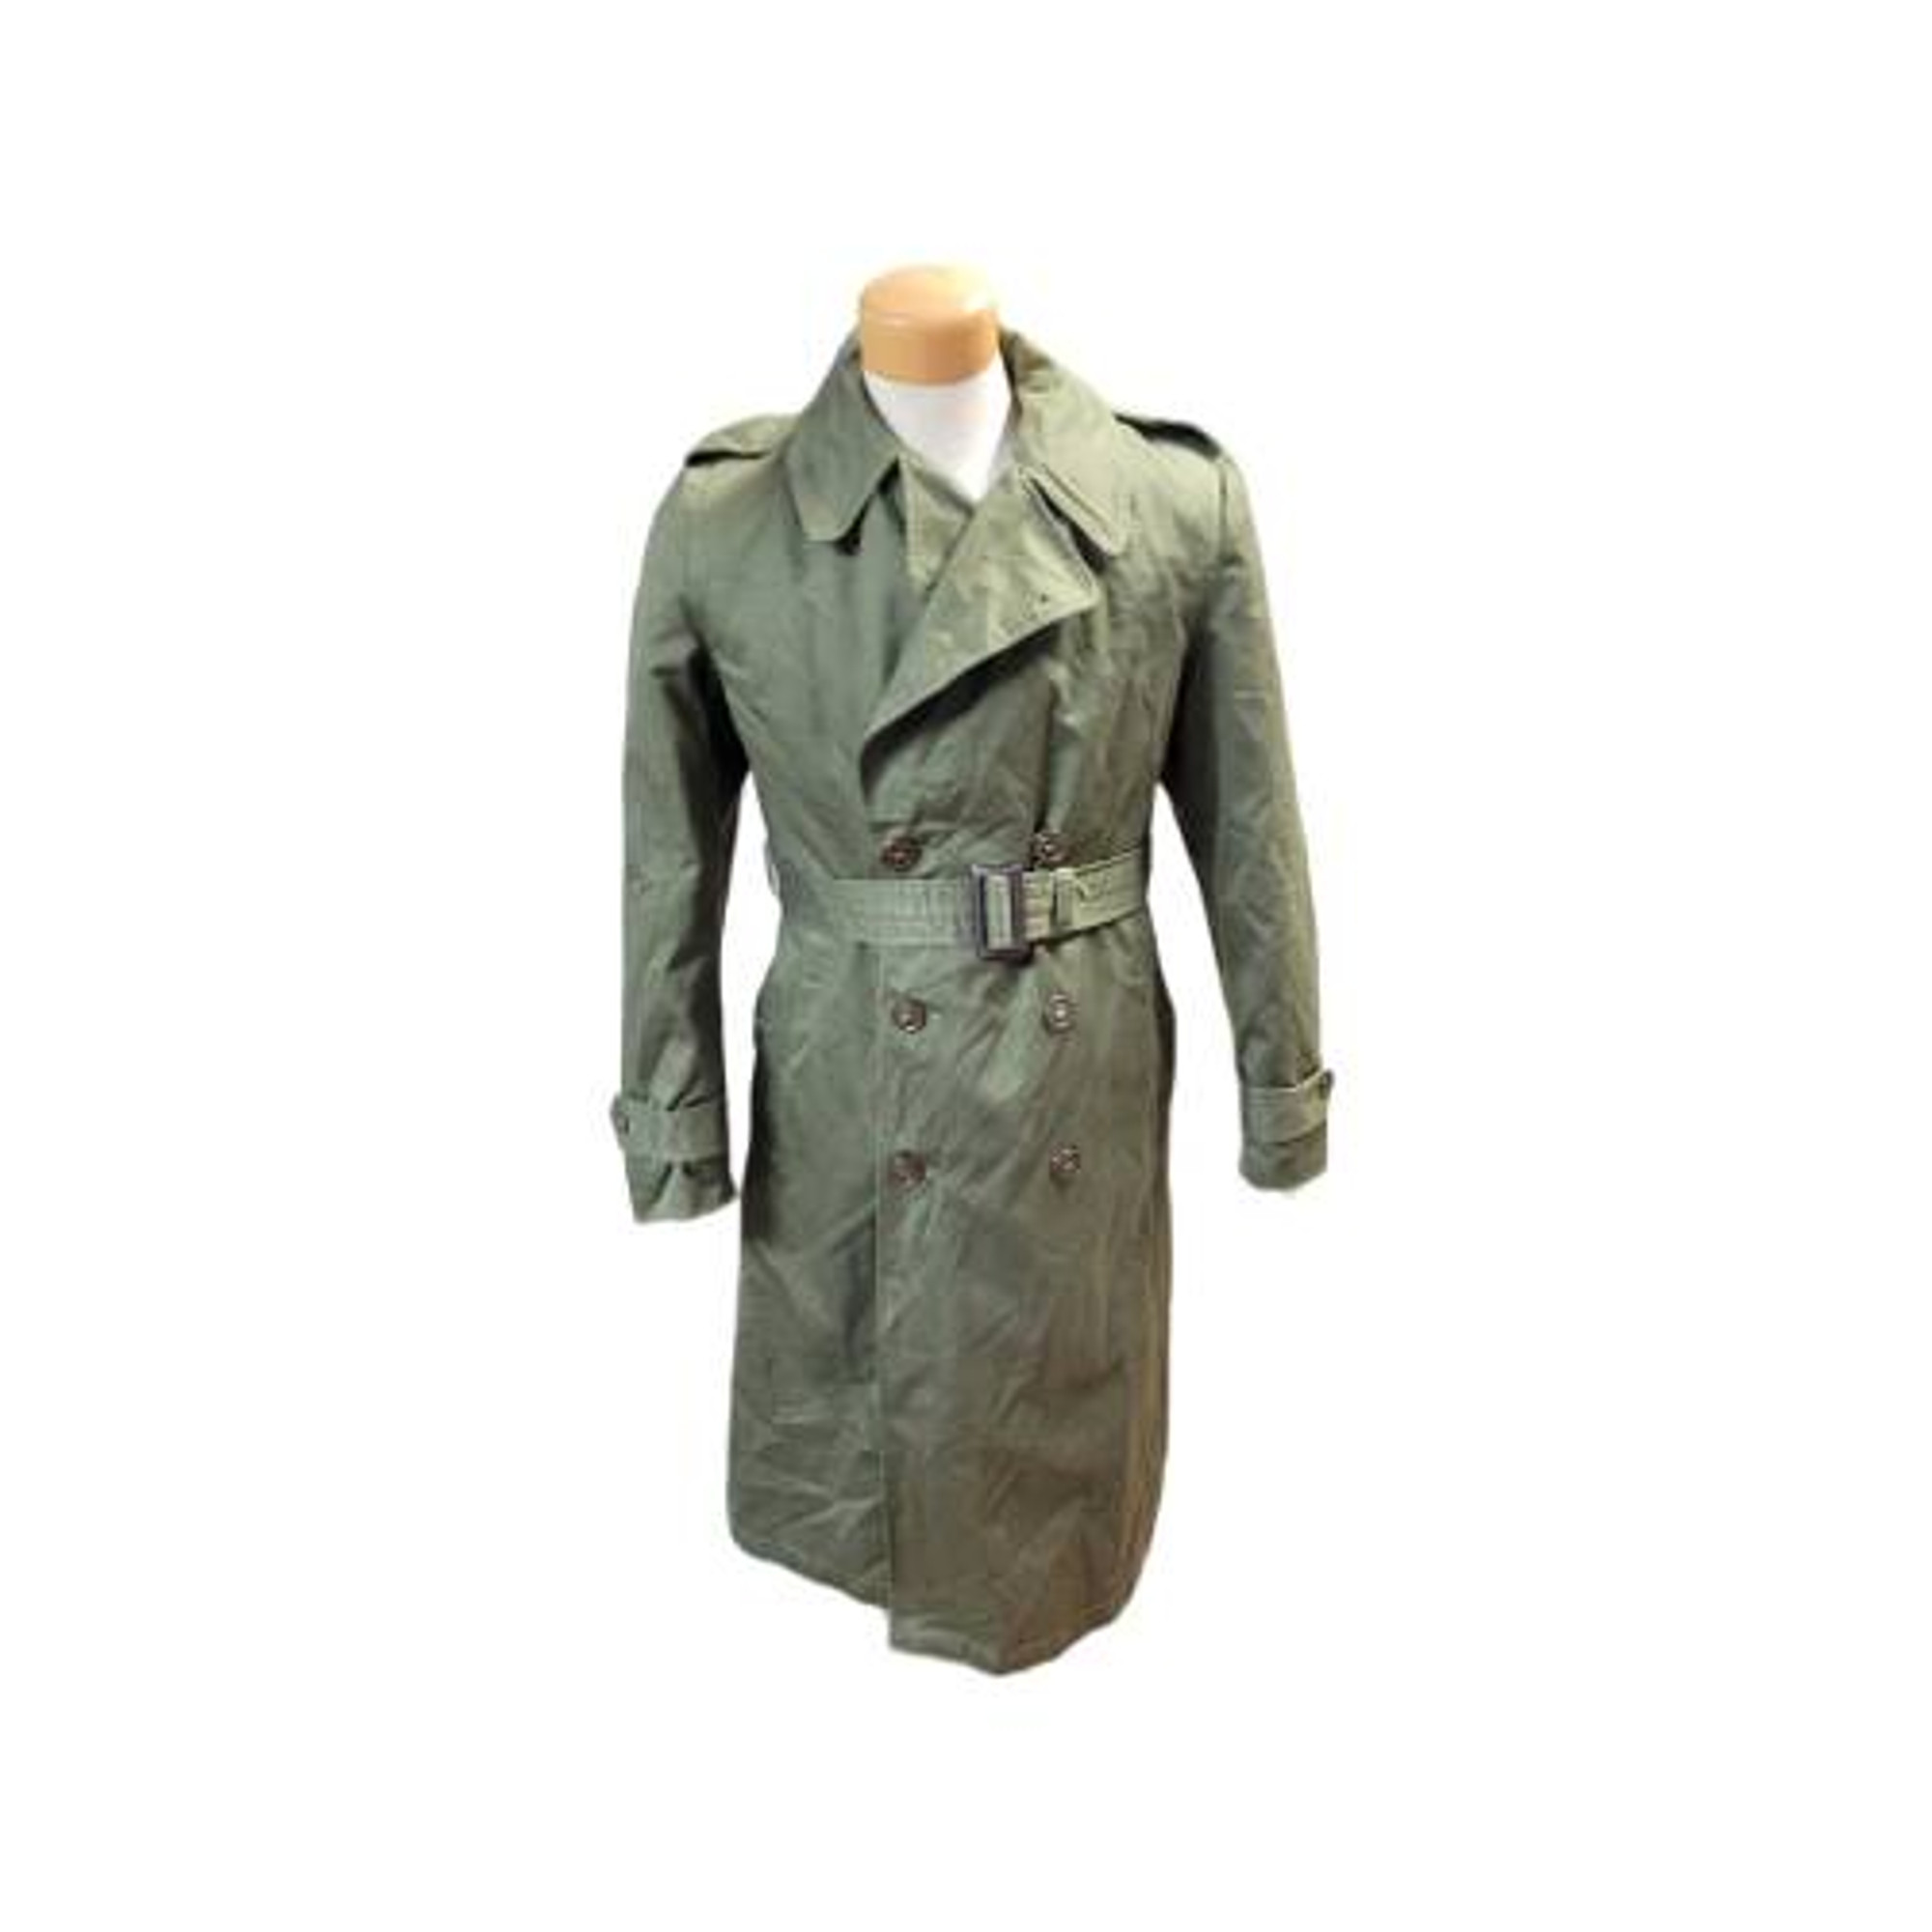 U.S. Armed Forces Overcoat